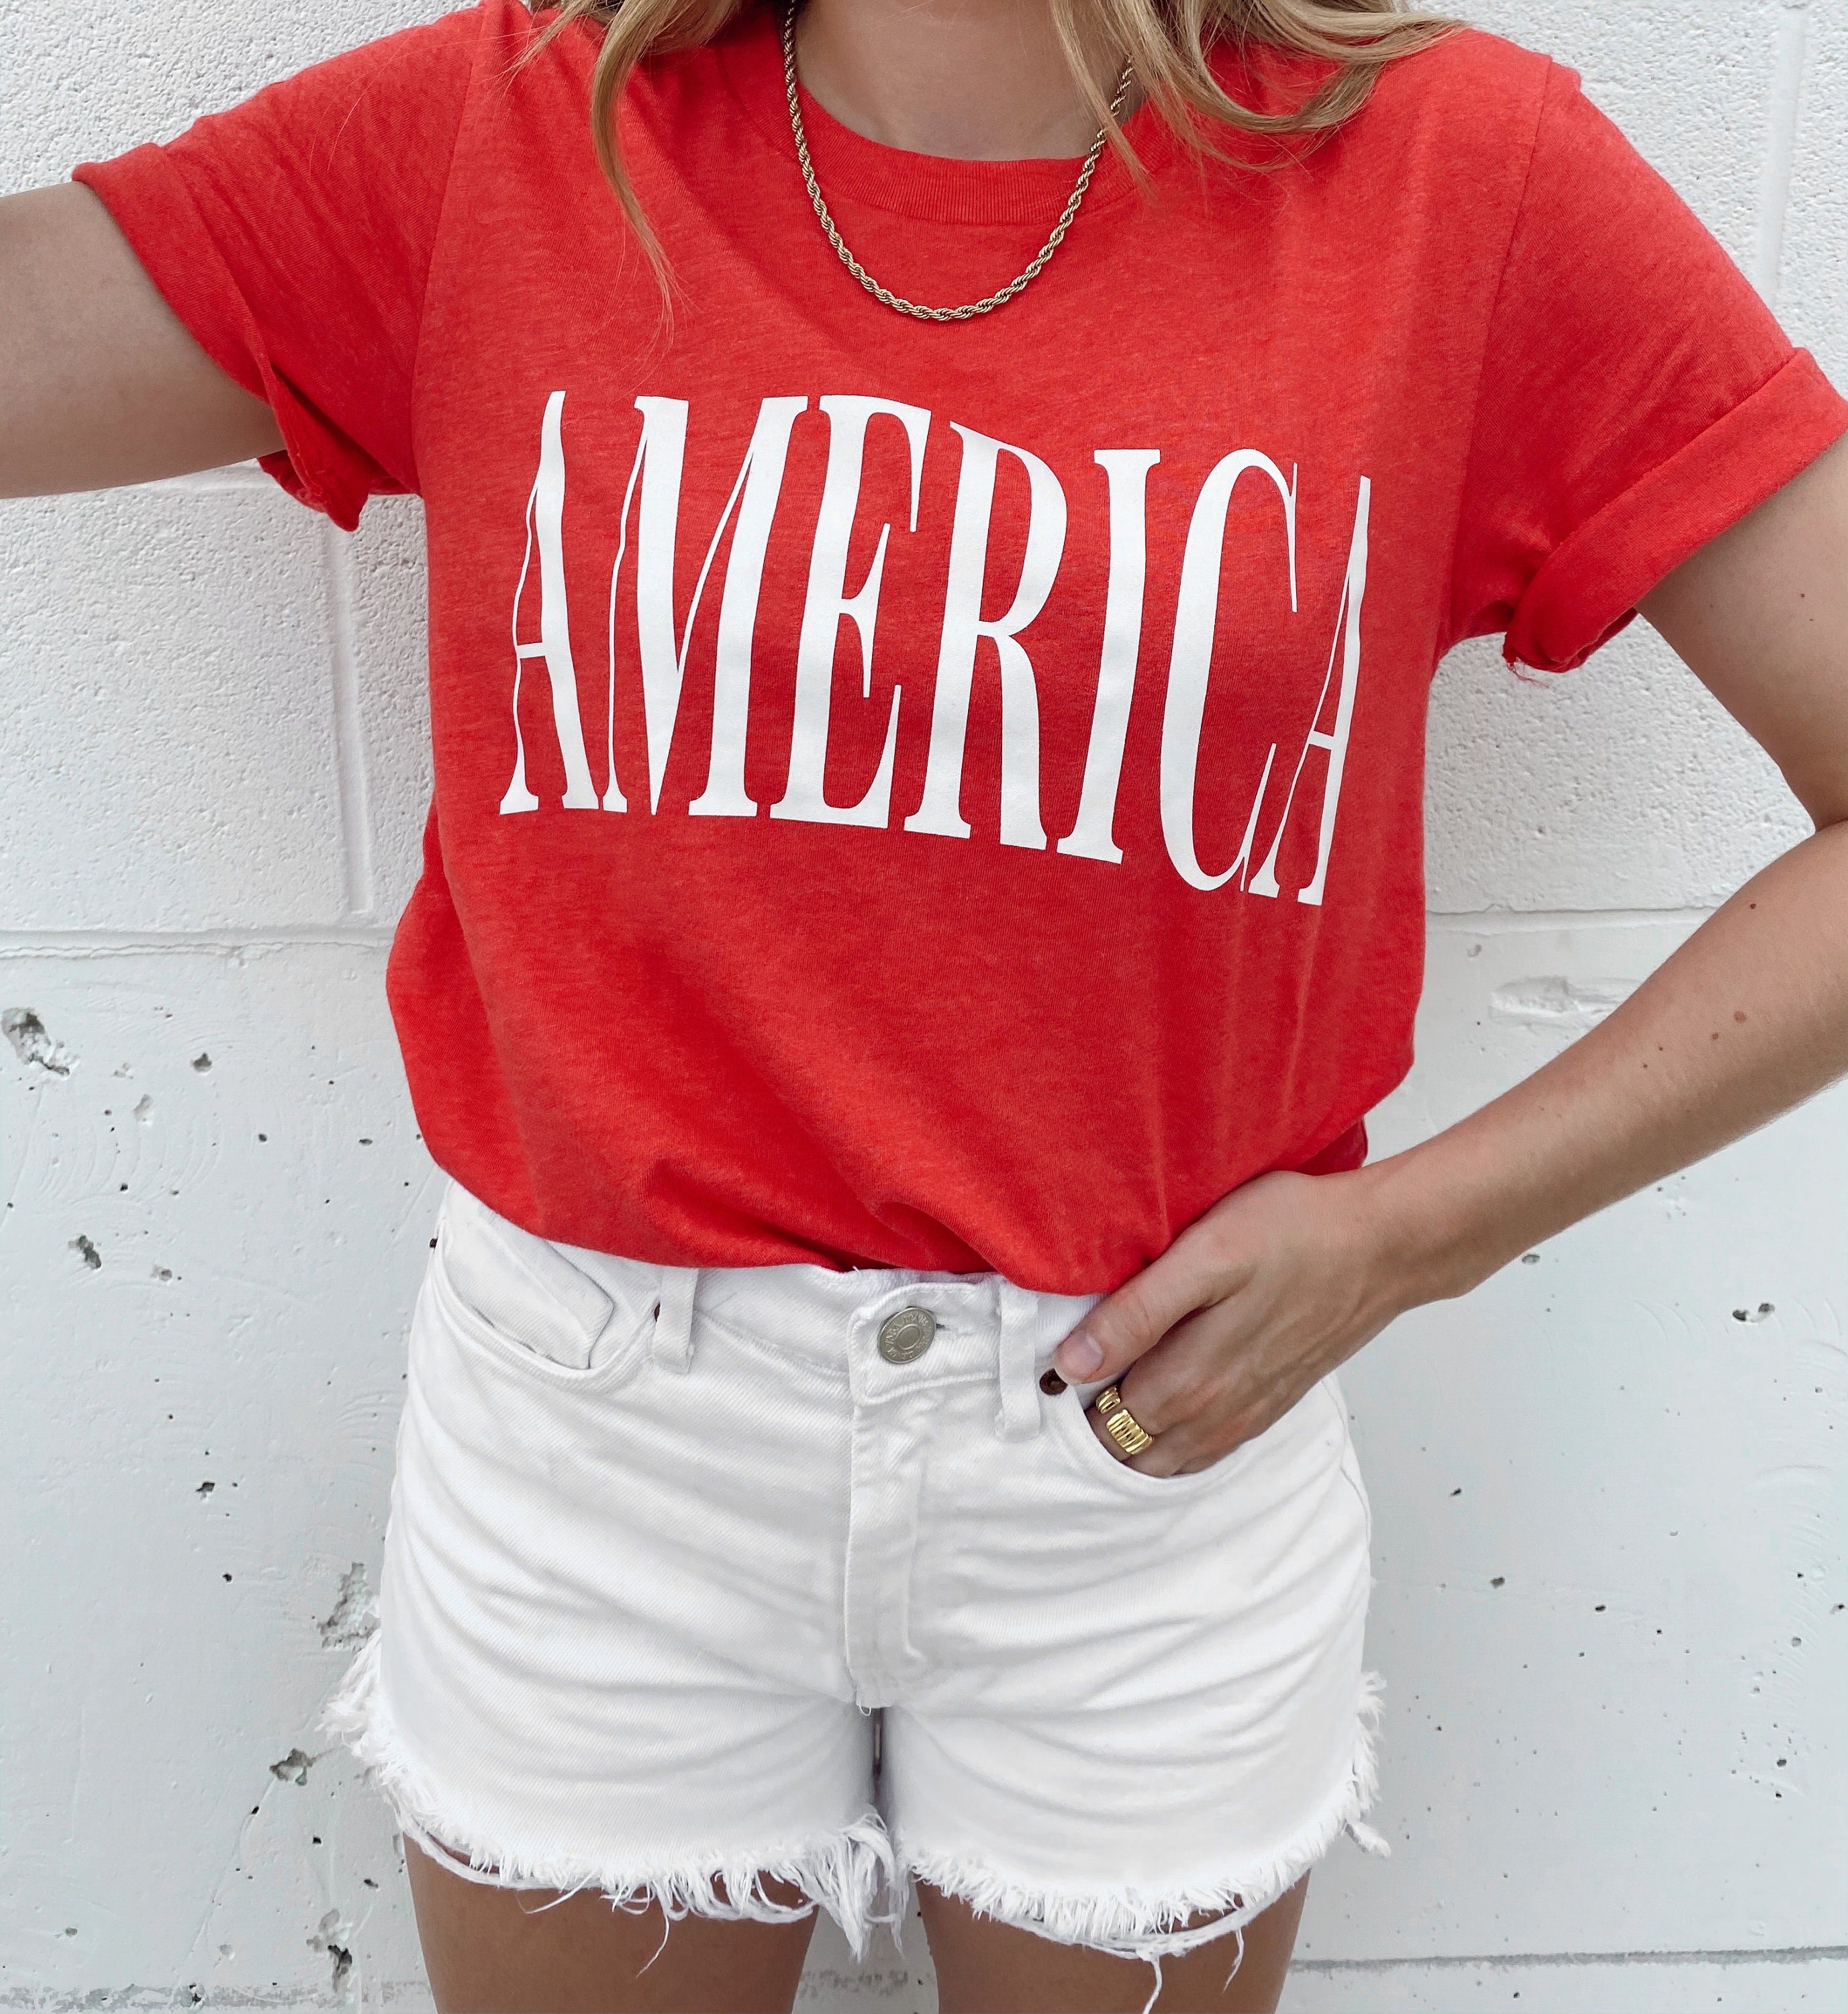 America T-shirt / Red White / Fourth of July | Etsy